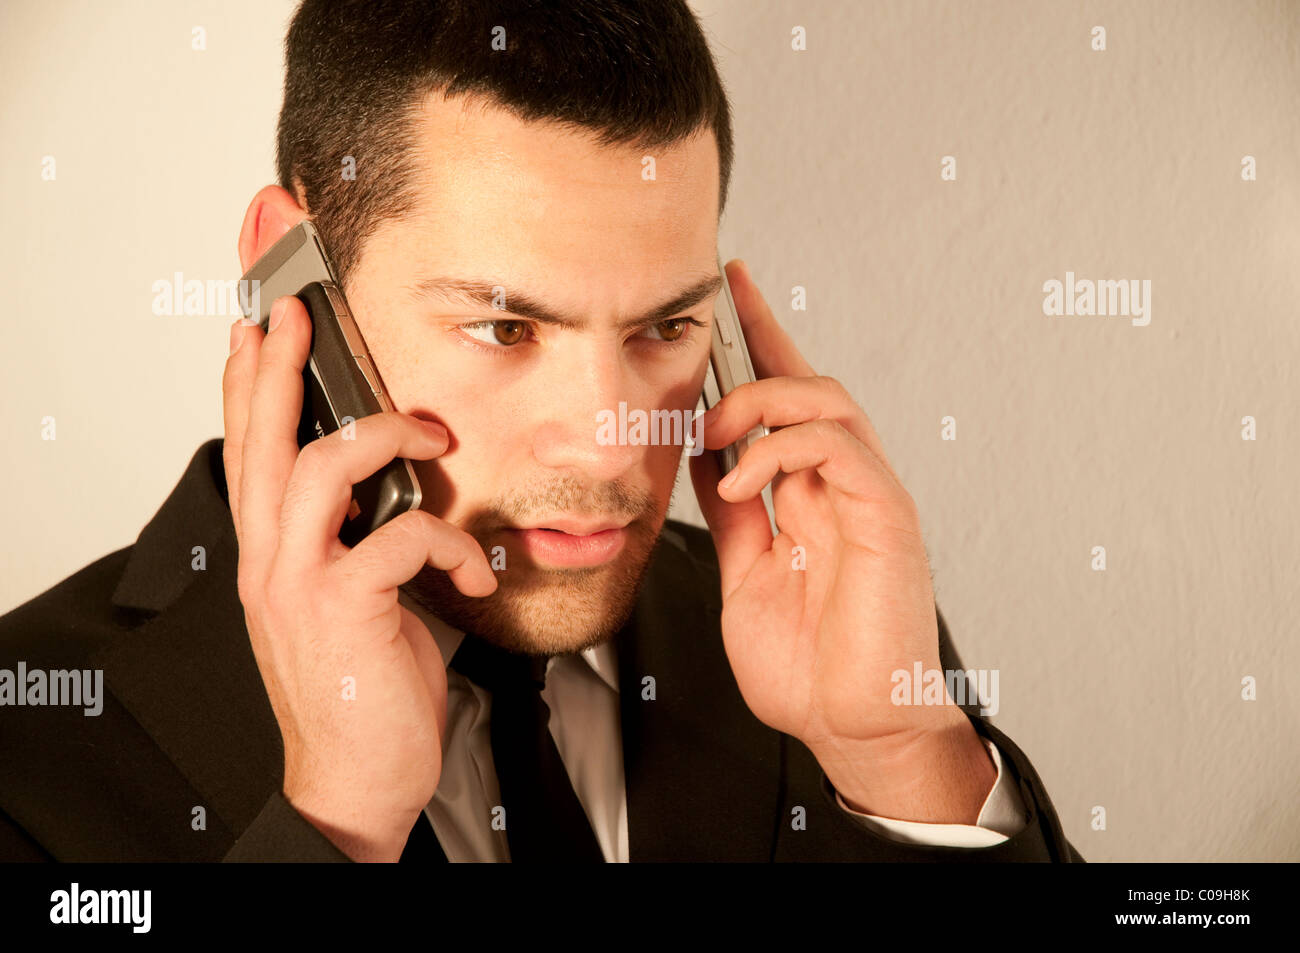 Young man using two mobile phones. Close view. Stock Photo